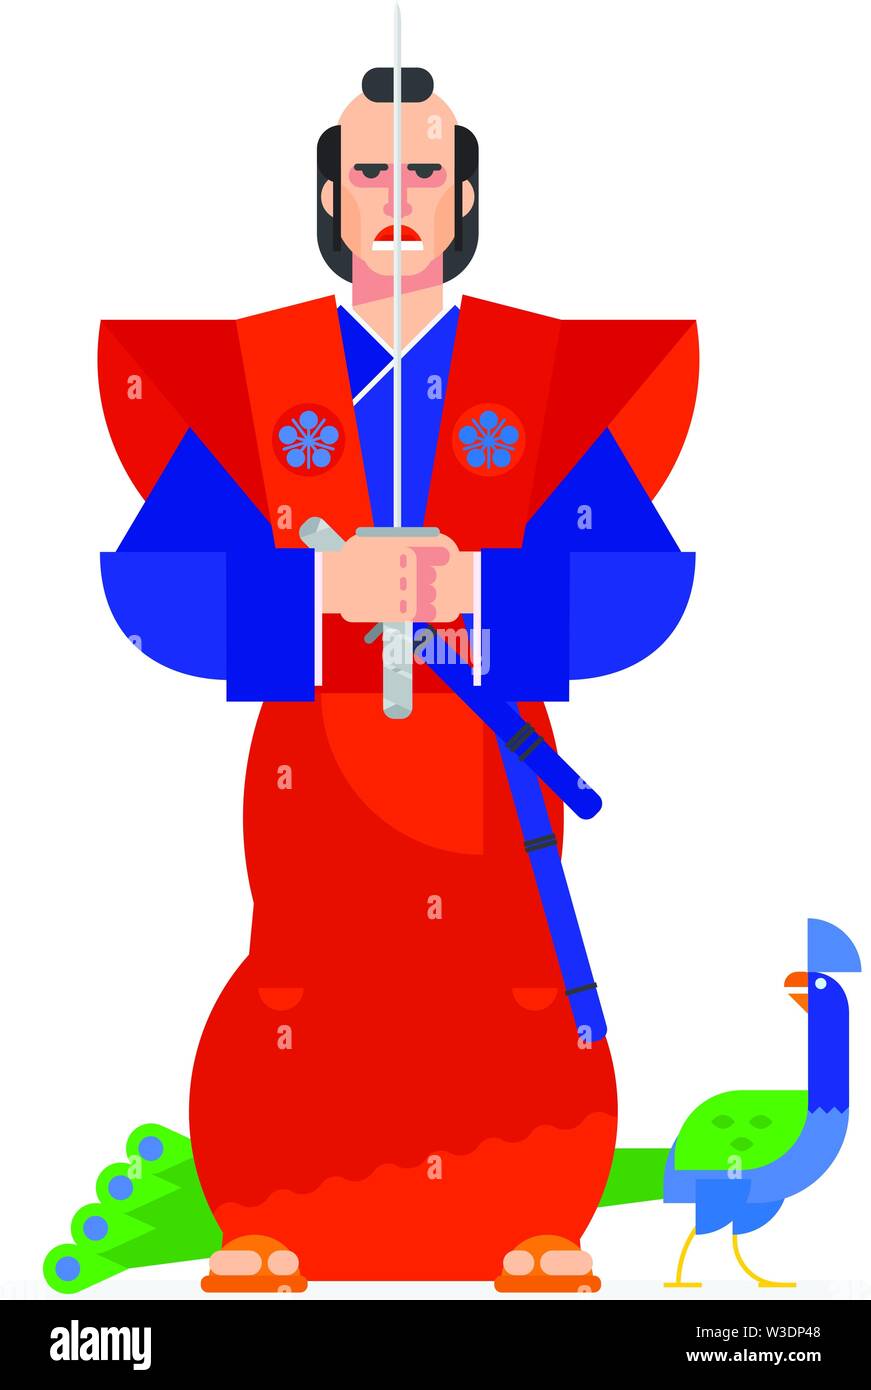 Samurai, painted in a cartoon flat style. Illustration of a Japanese warrior and peacock character. Image is isolated on white background. Stock Vector